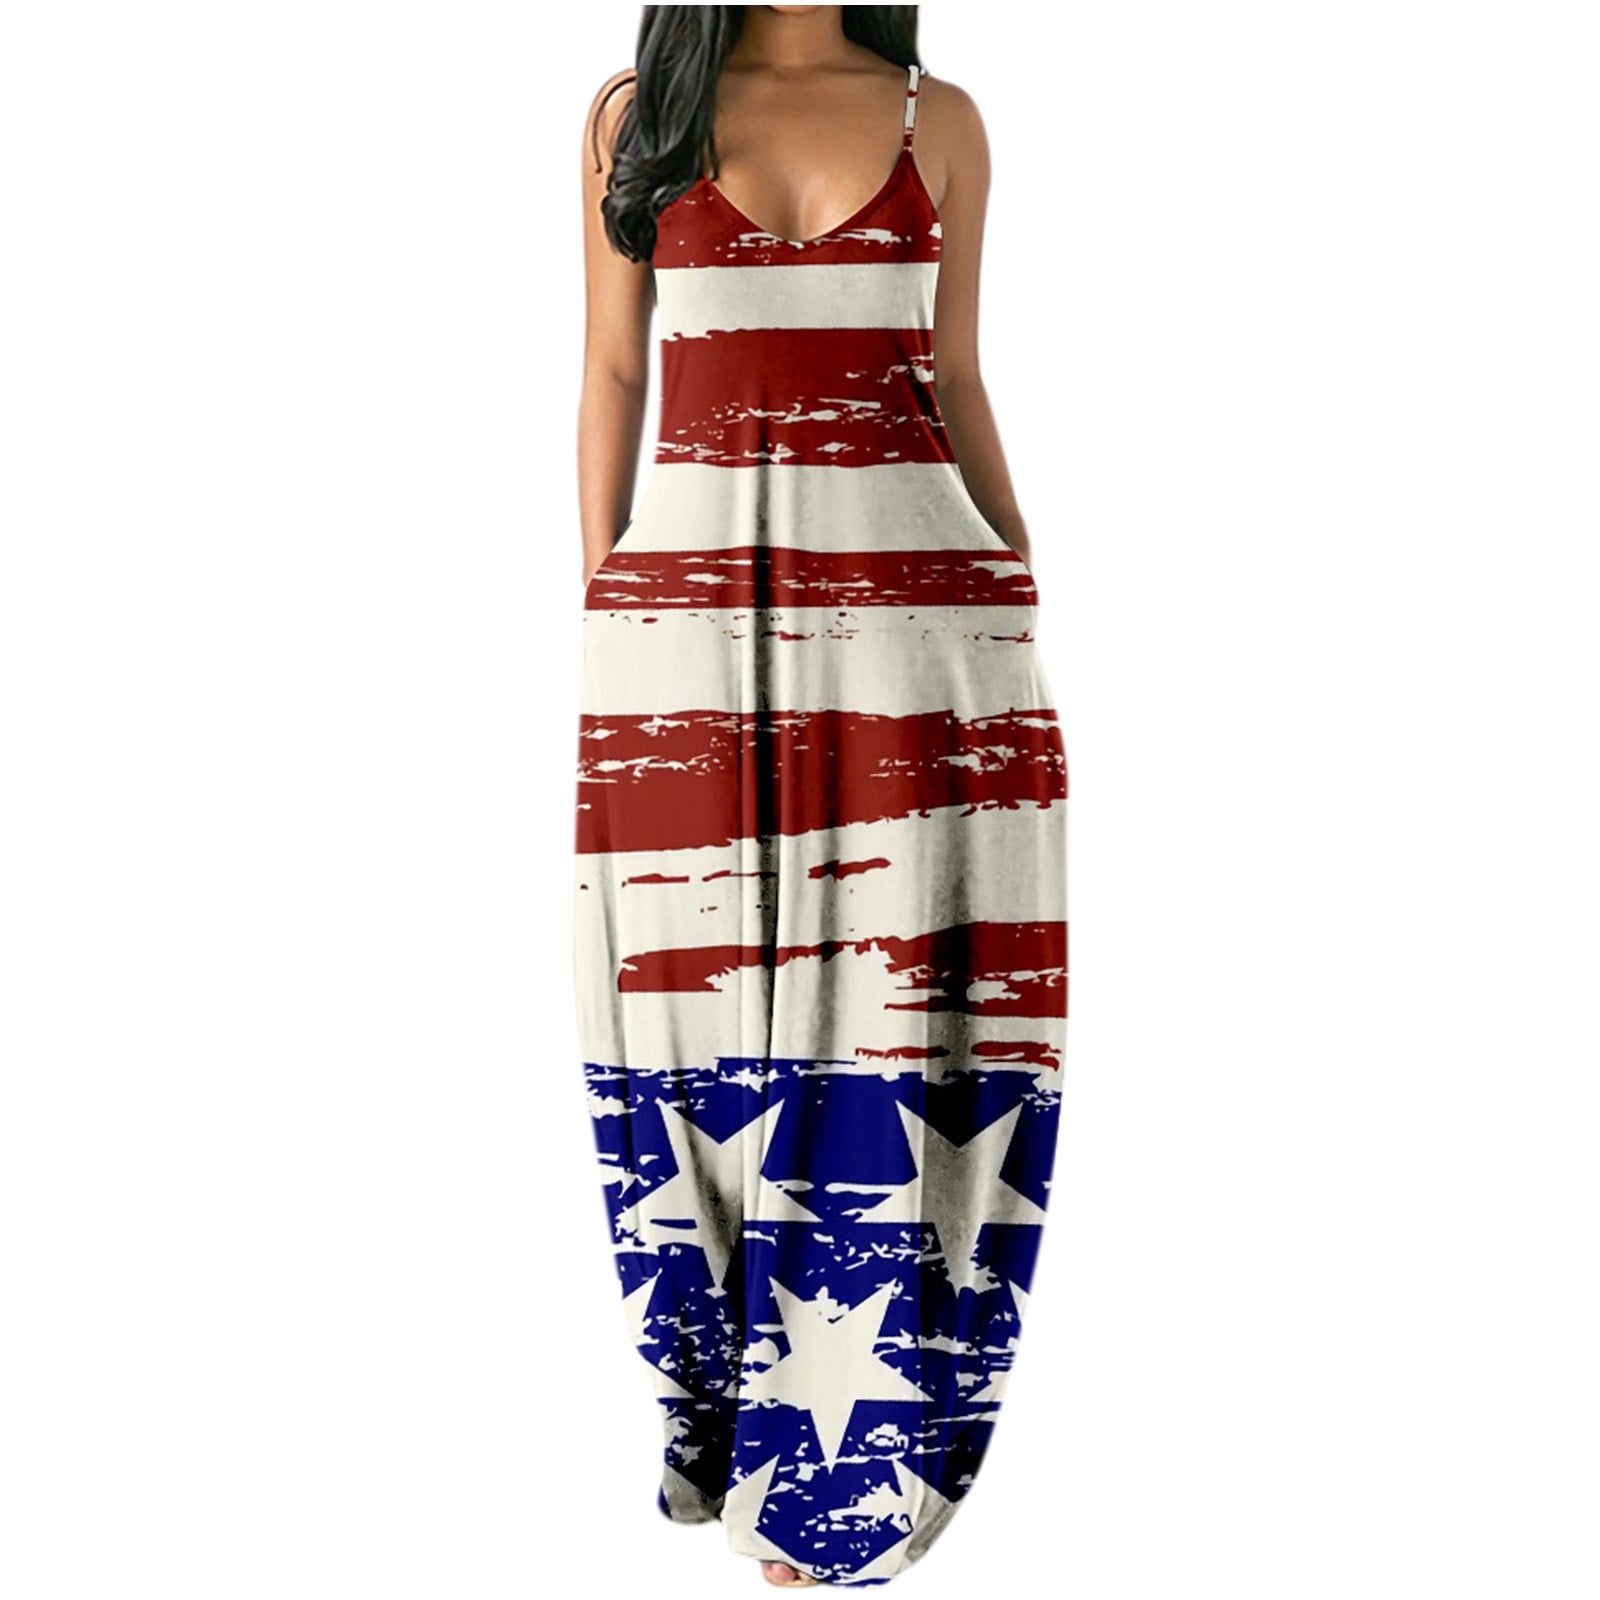 Mchoice 4th of July summer dress for women print sexy dresses plus size ...